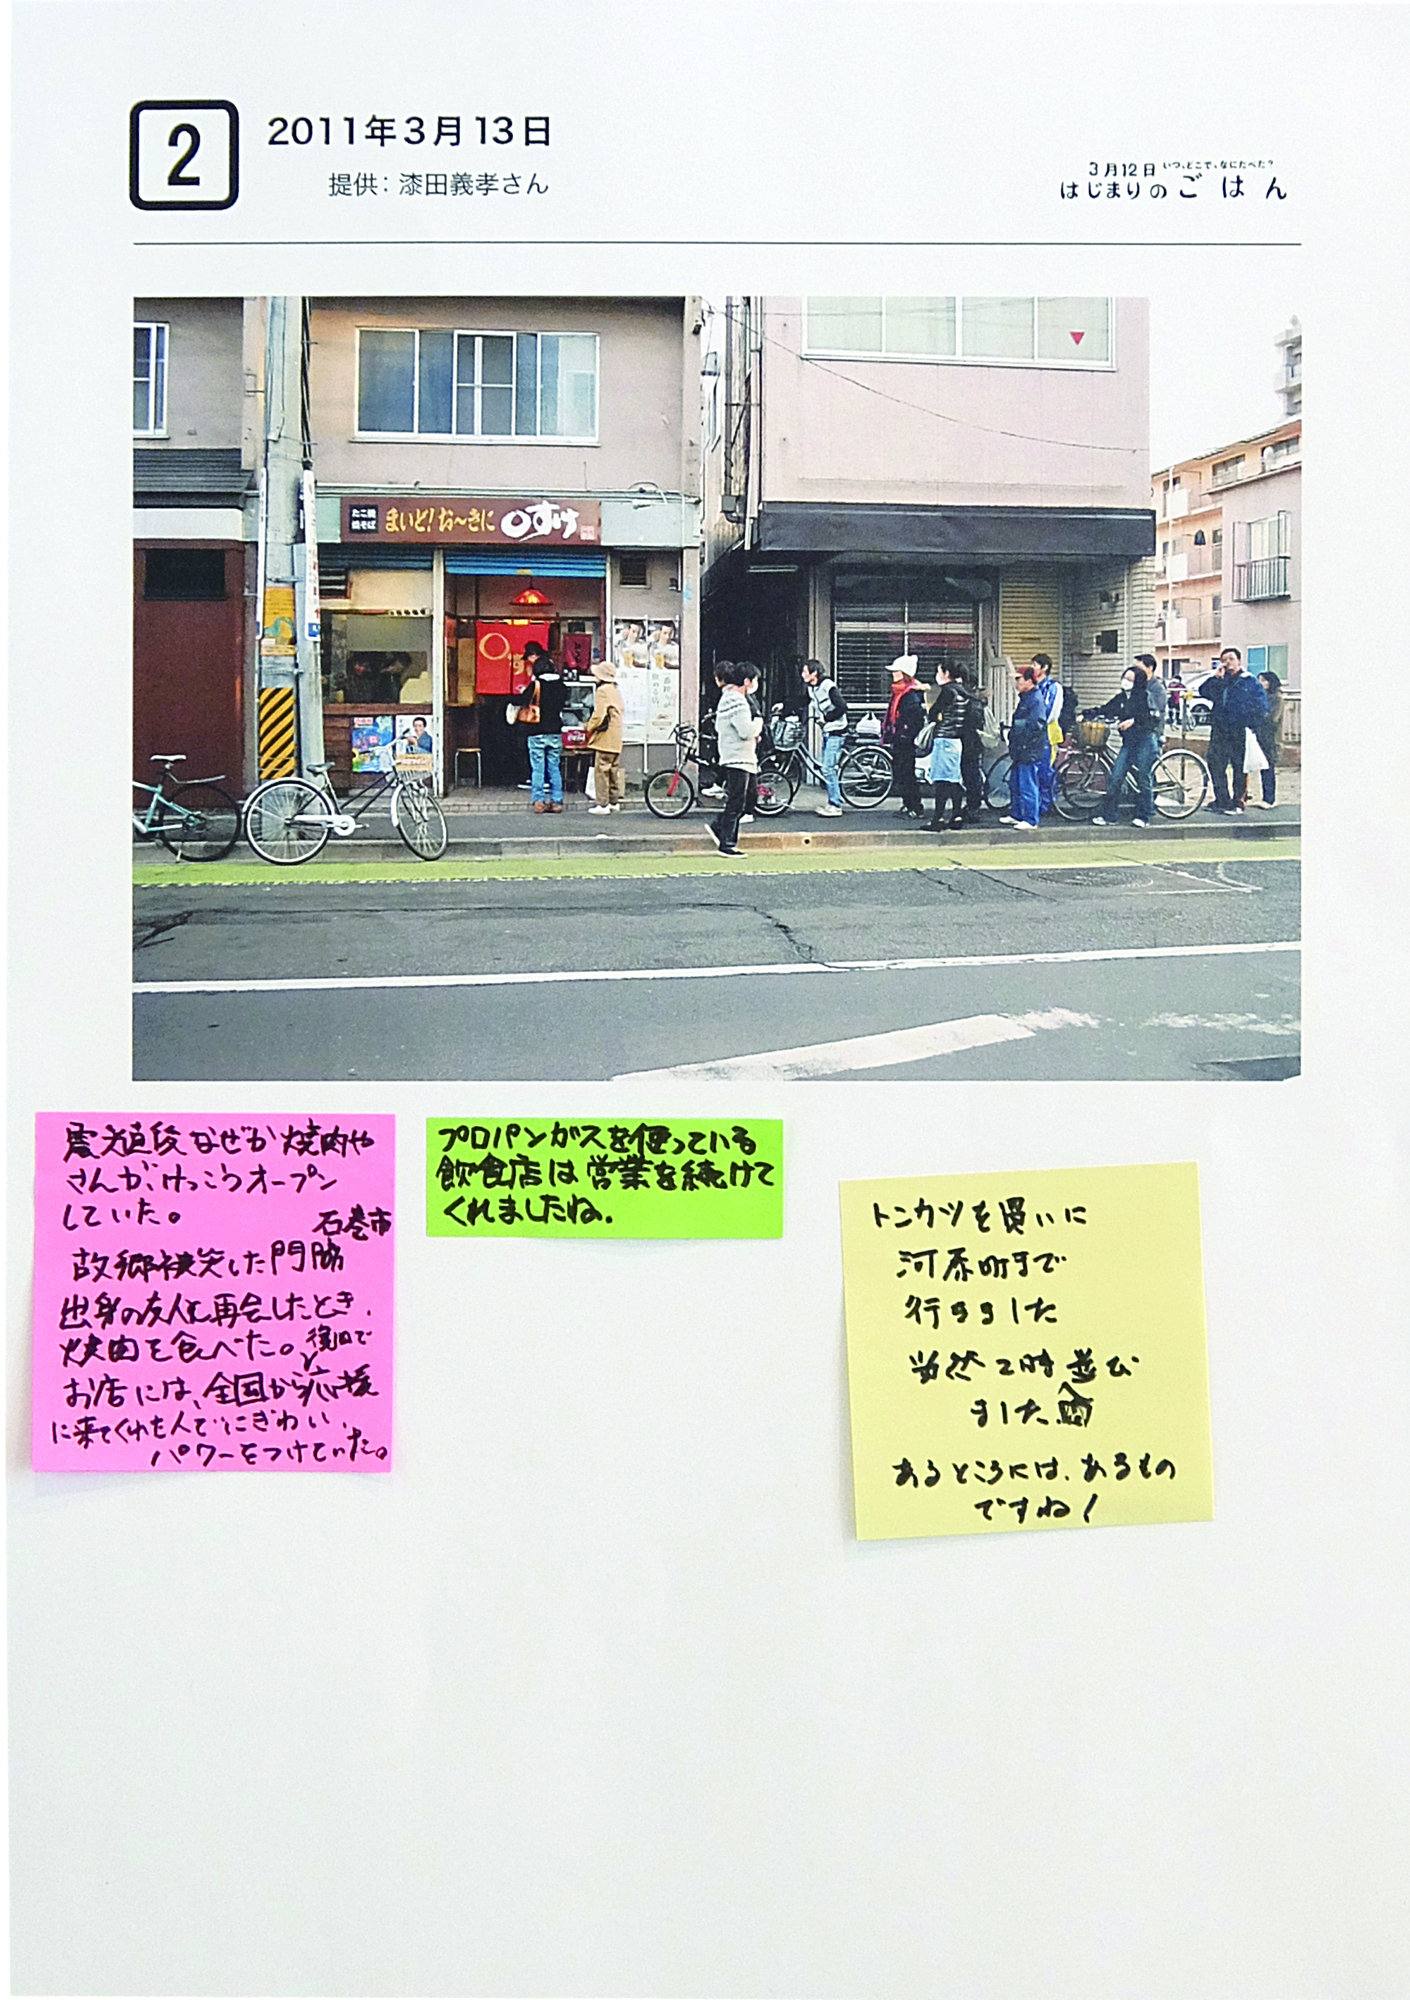 March 12: The First Meal After the Earthquake/Individually owned store...